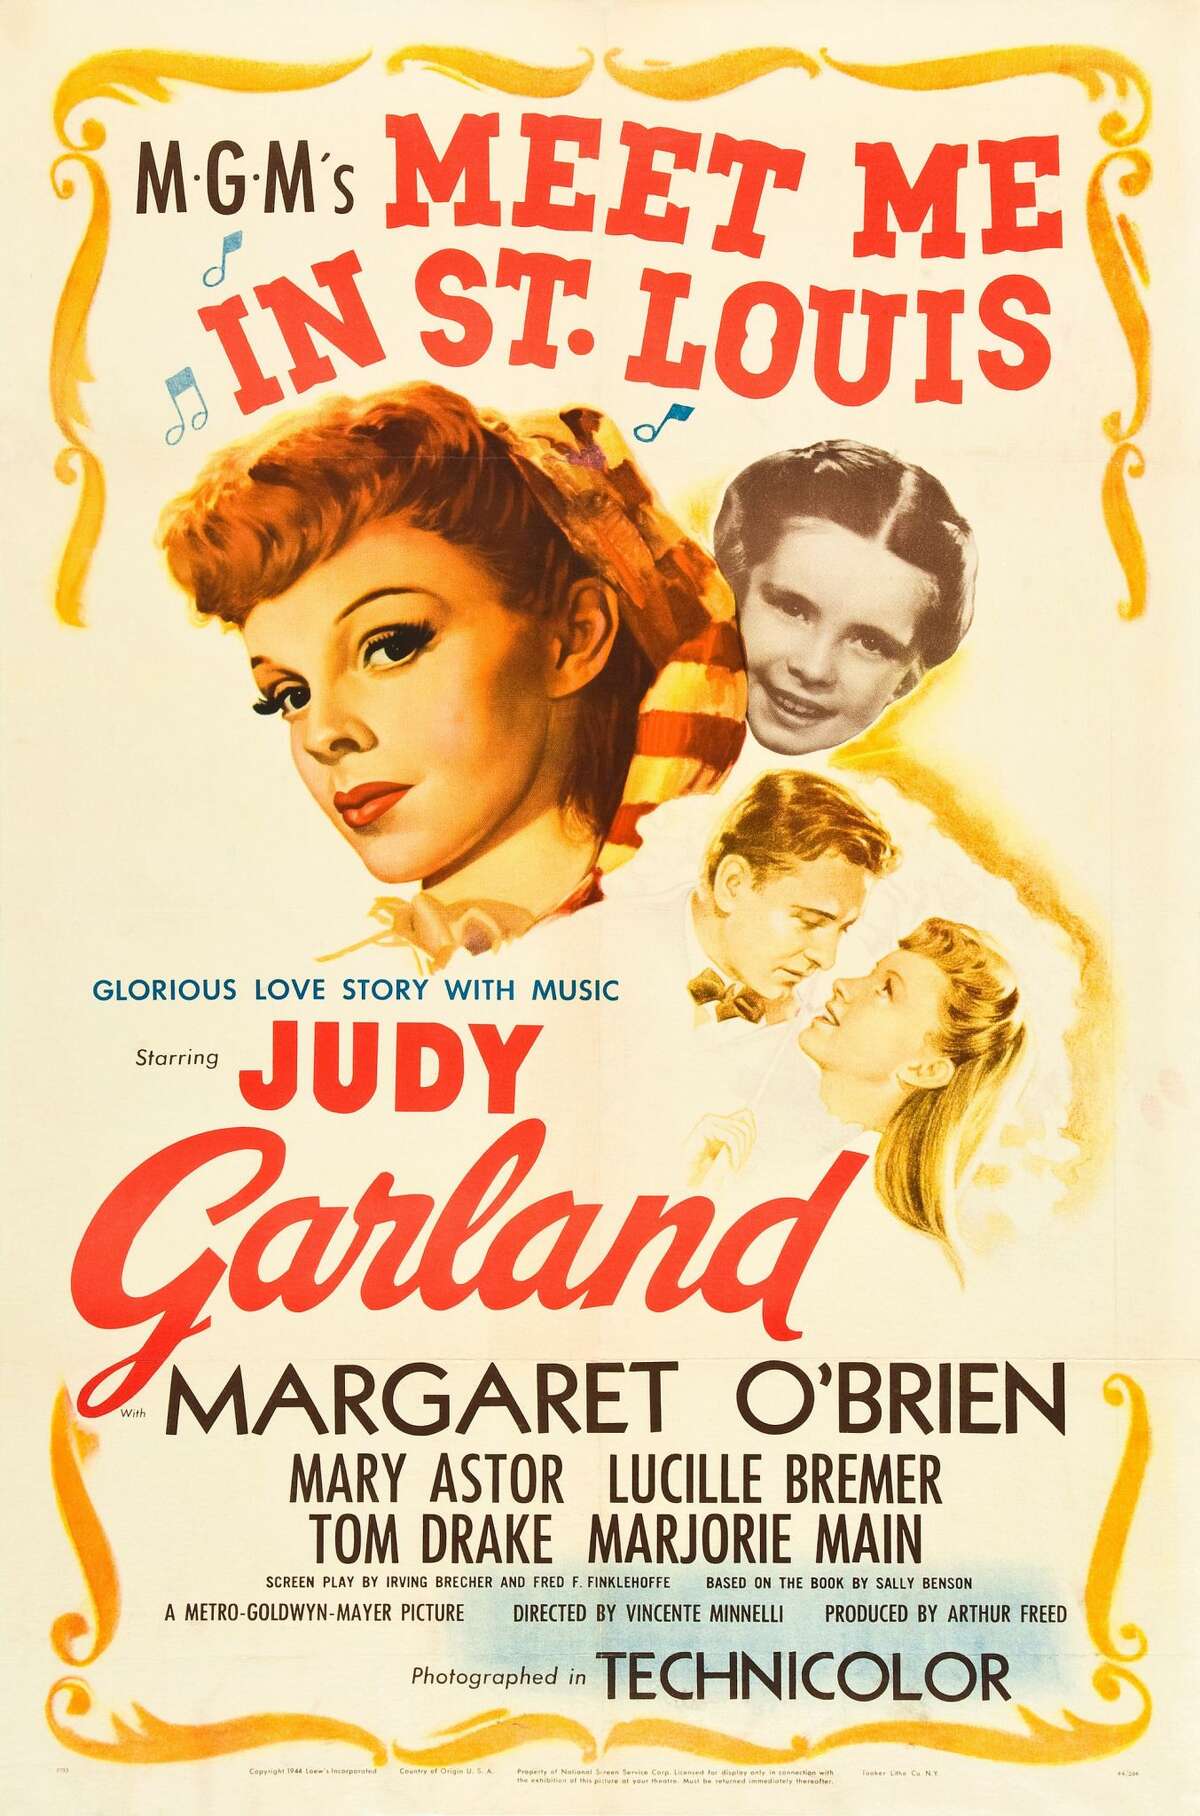 "Meet Me In St. Louis" stars Judy Garland and tells the story of the Smith family living in St. Louis leading up to the 1904 World's Fair.